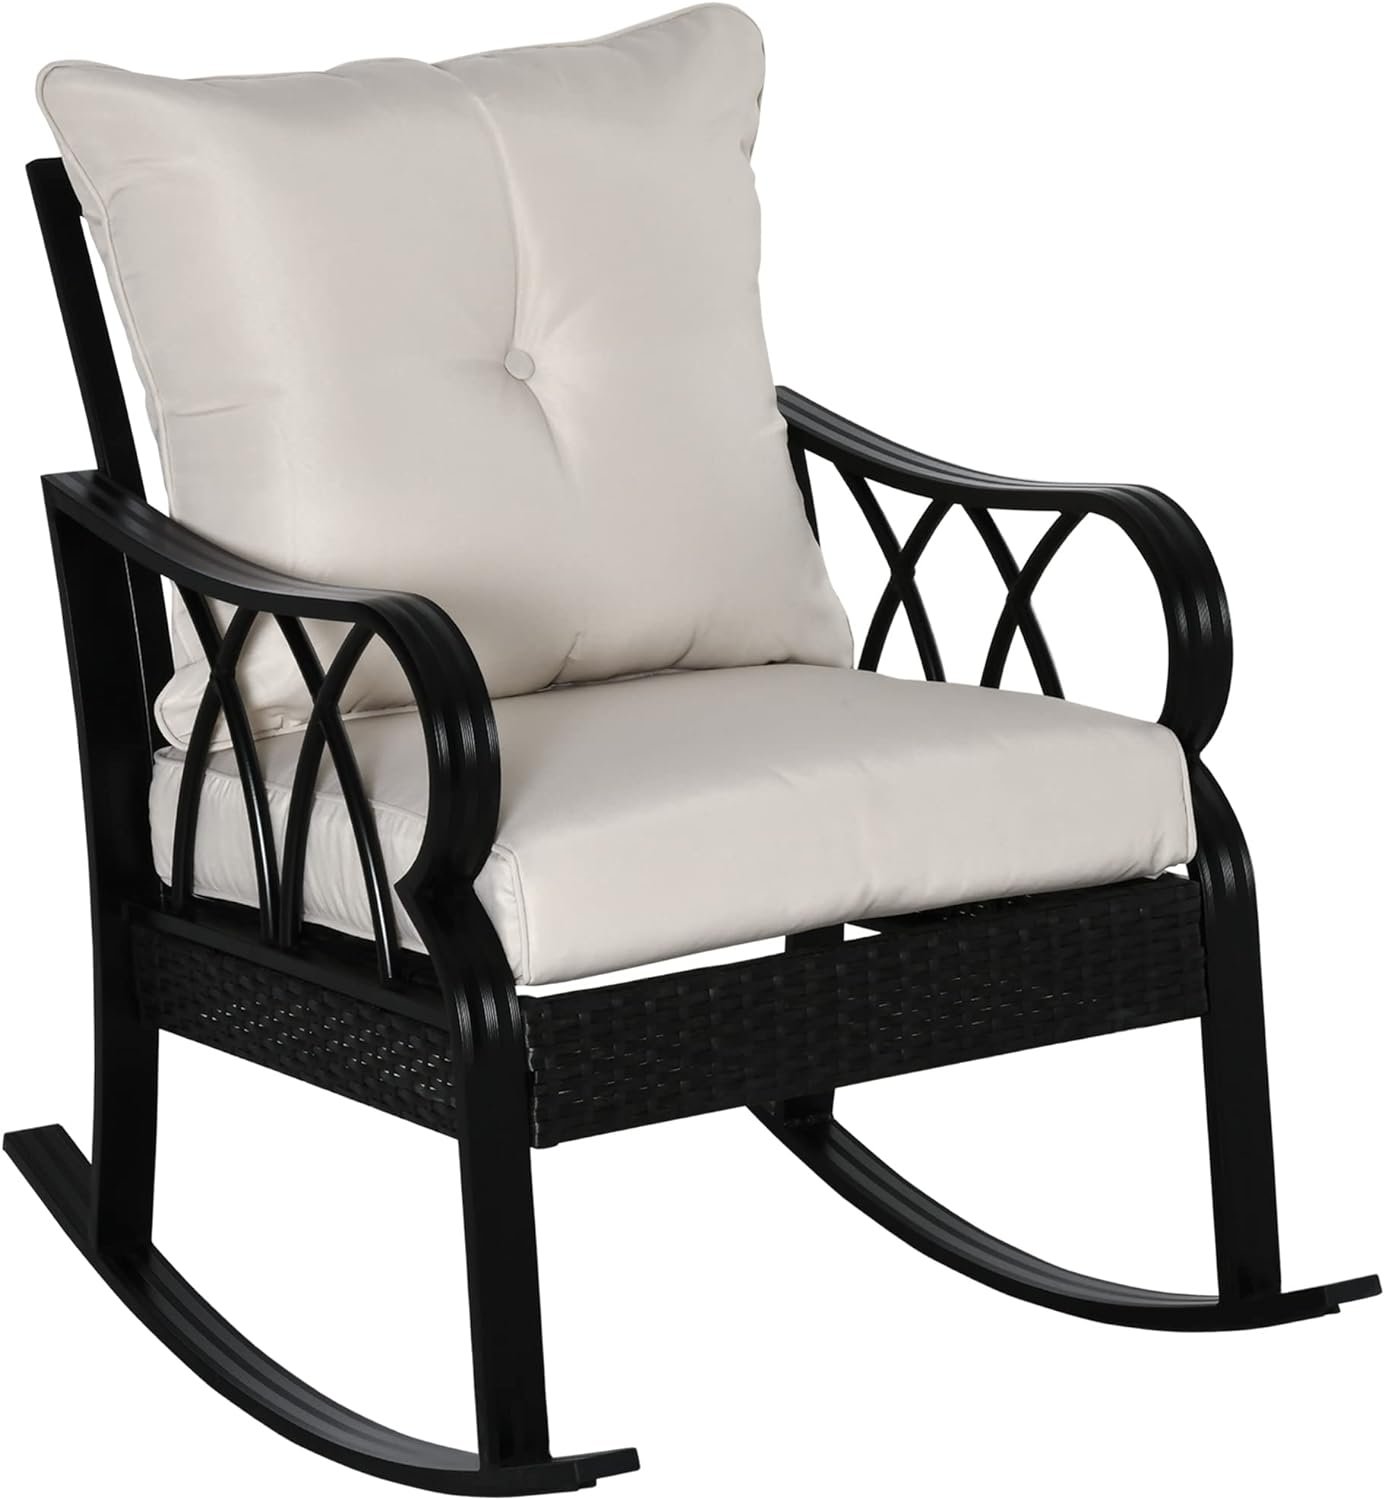 Outsunny Wicker Rocking Chair Review